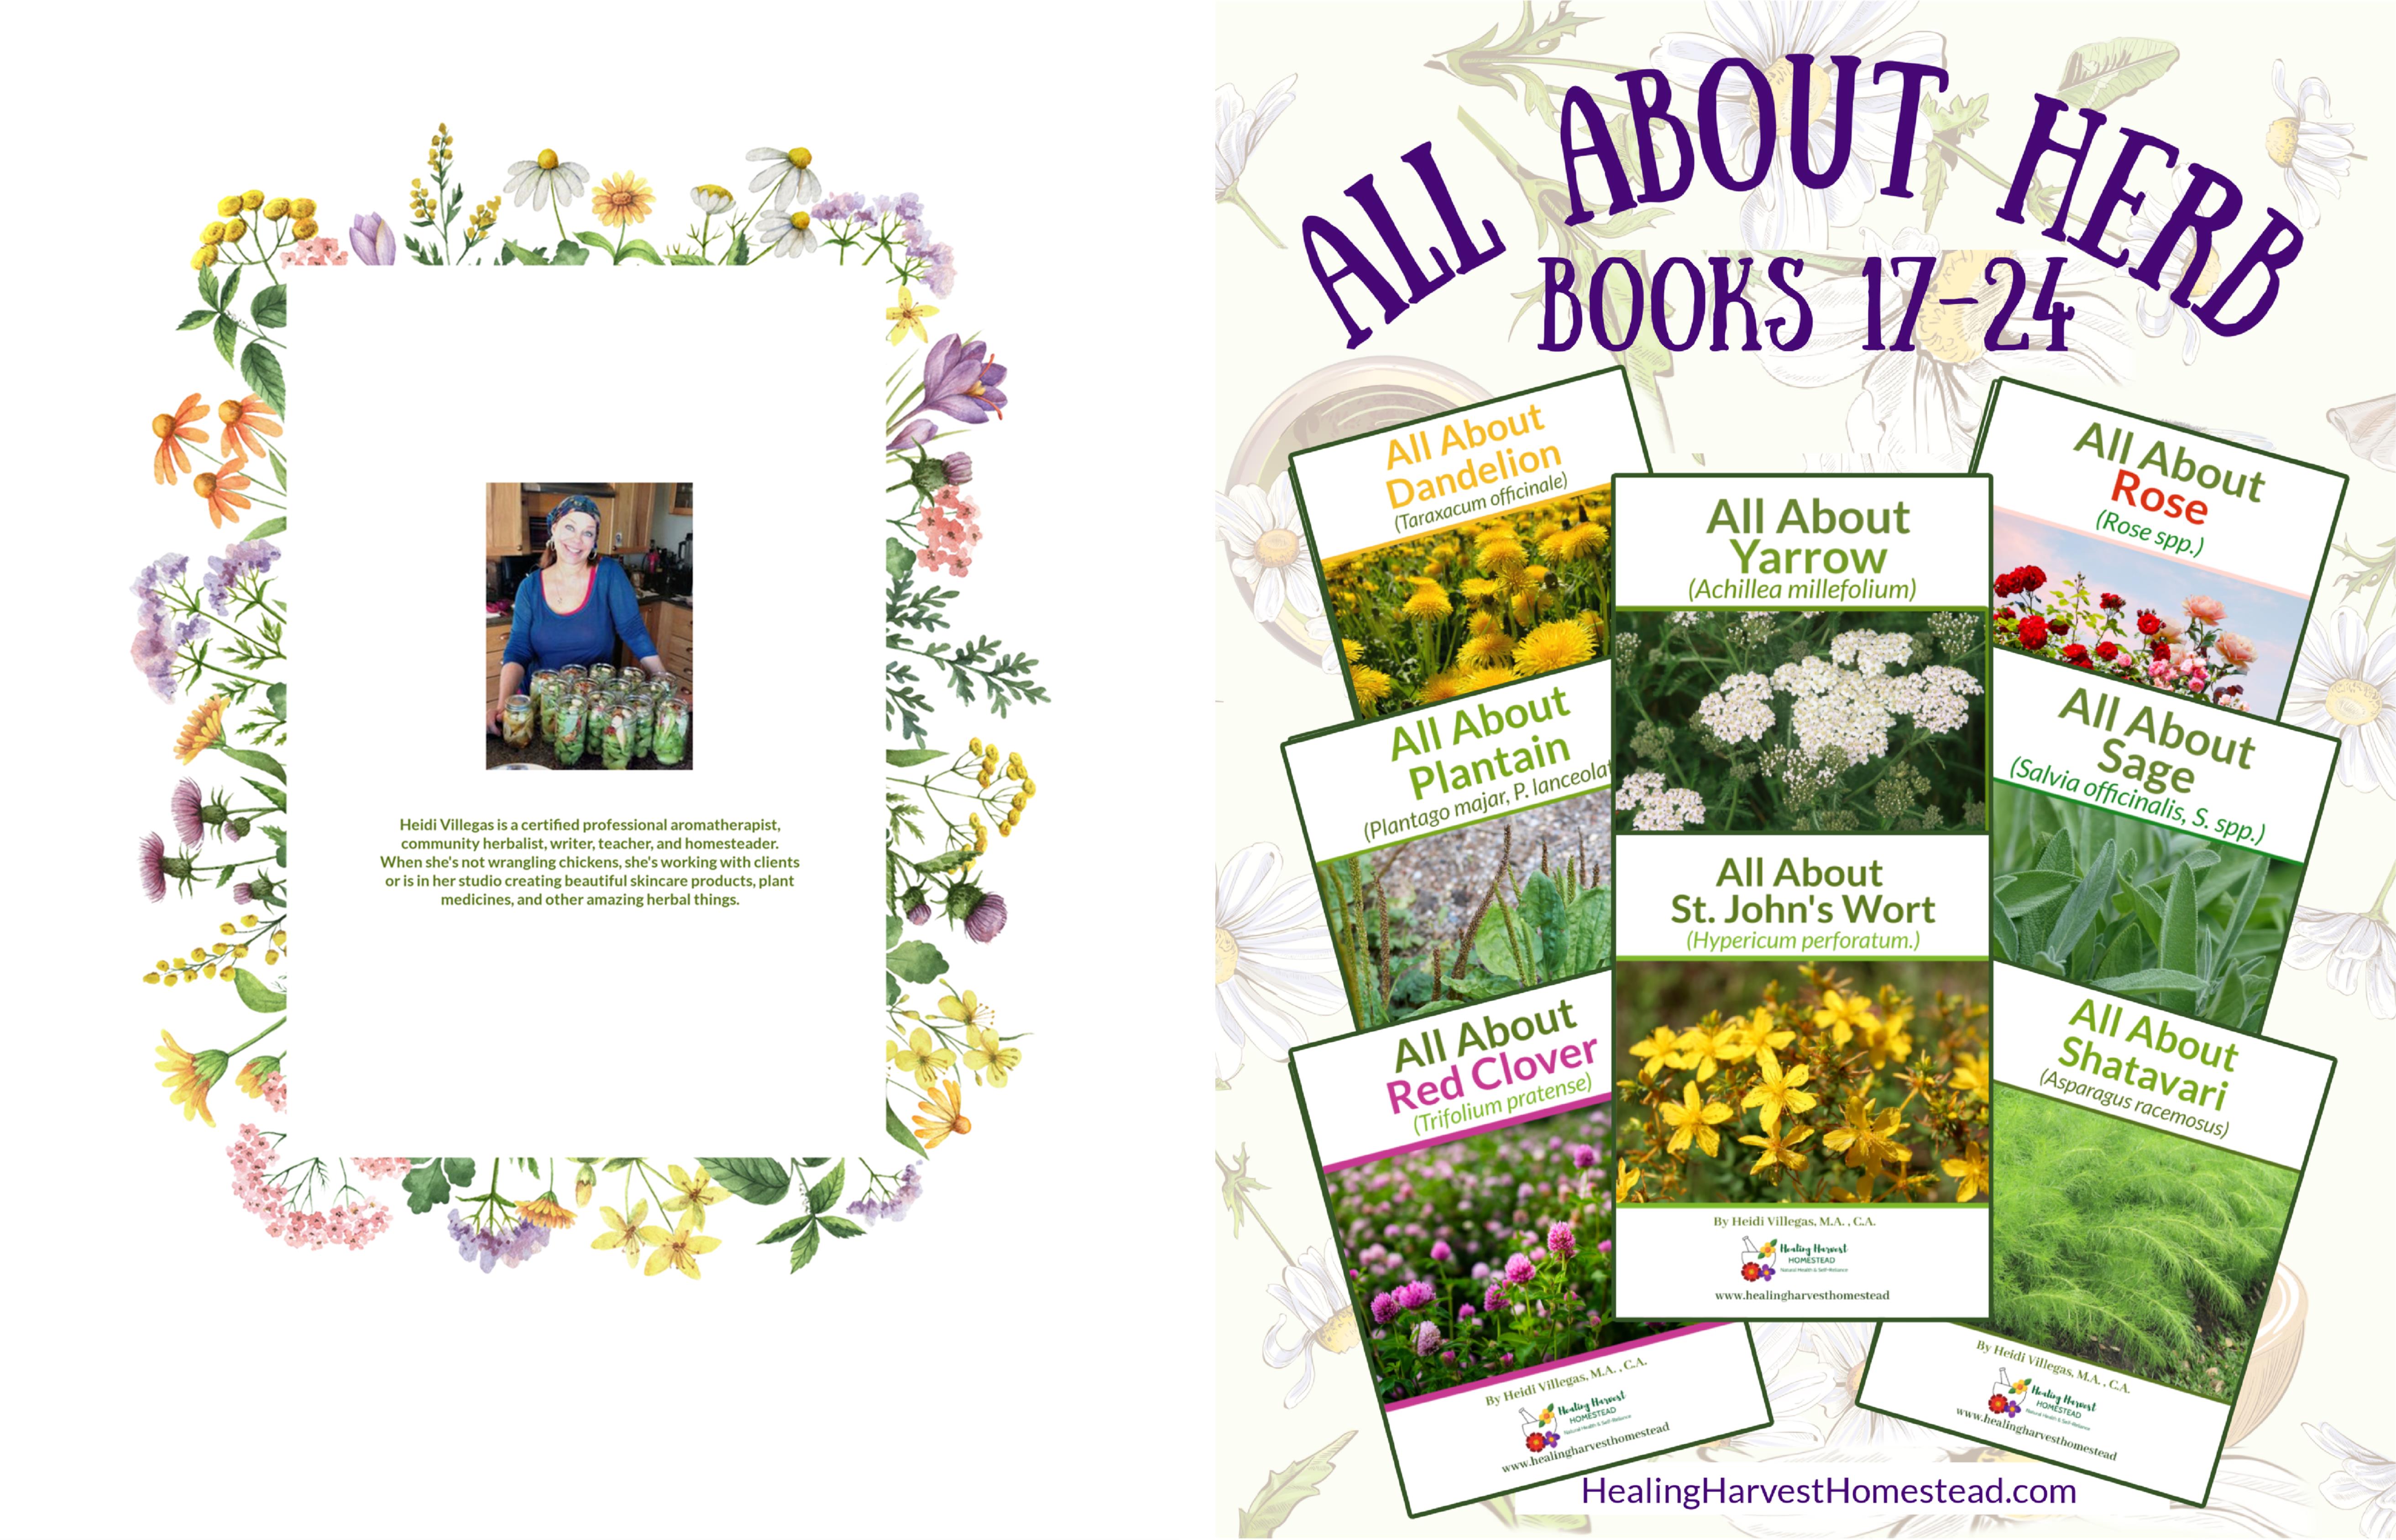  All About Herbs Books 17 - 24 cover image